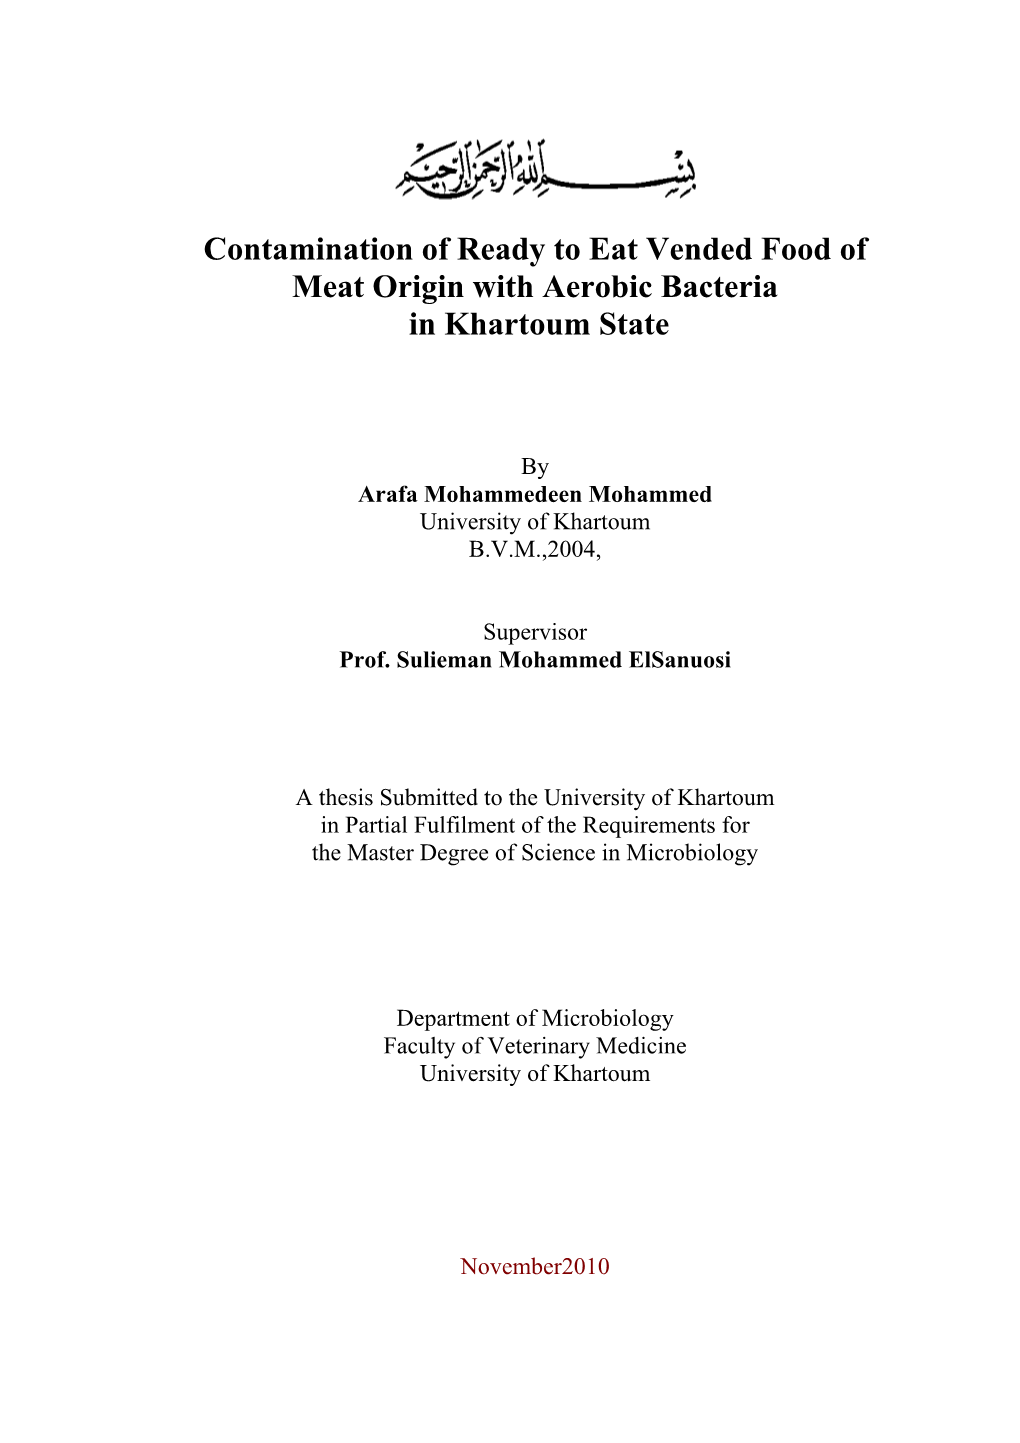 Contamination of Ready to Eat Vended Food of Meat Origin with Aerobic Bacteria in Khartoum State